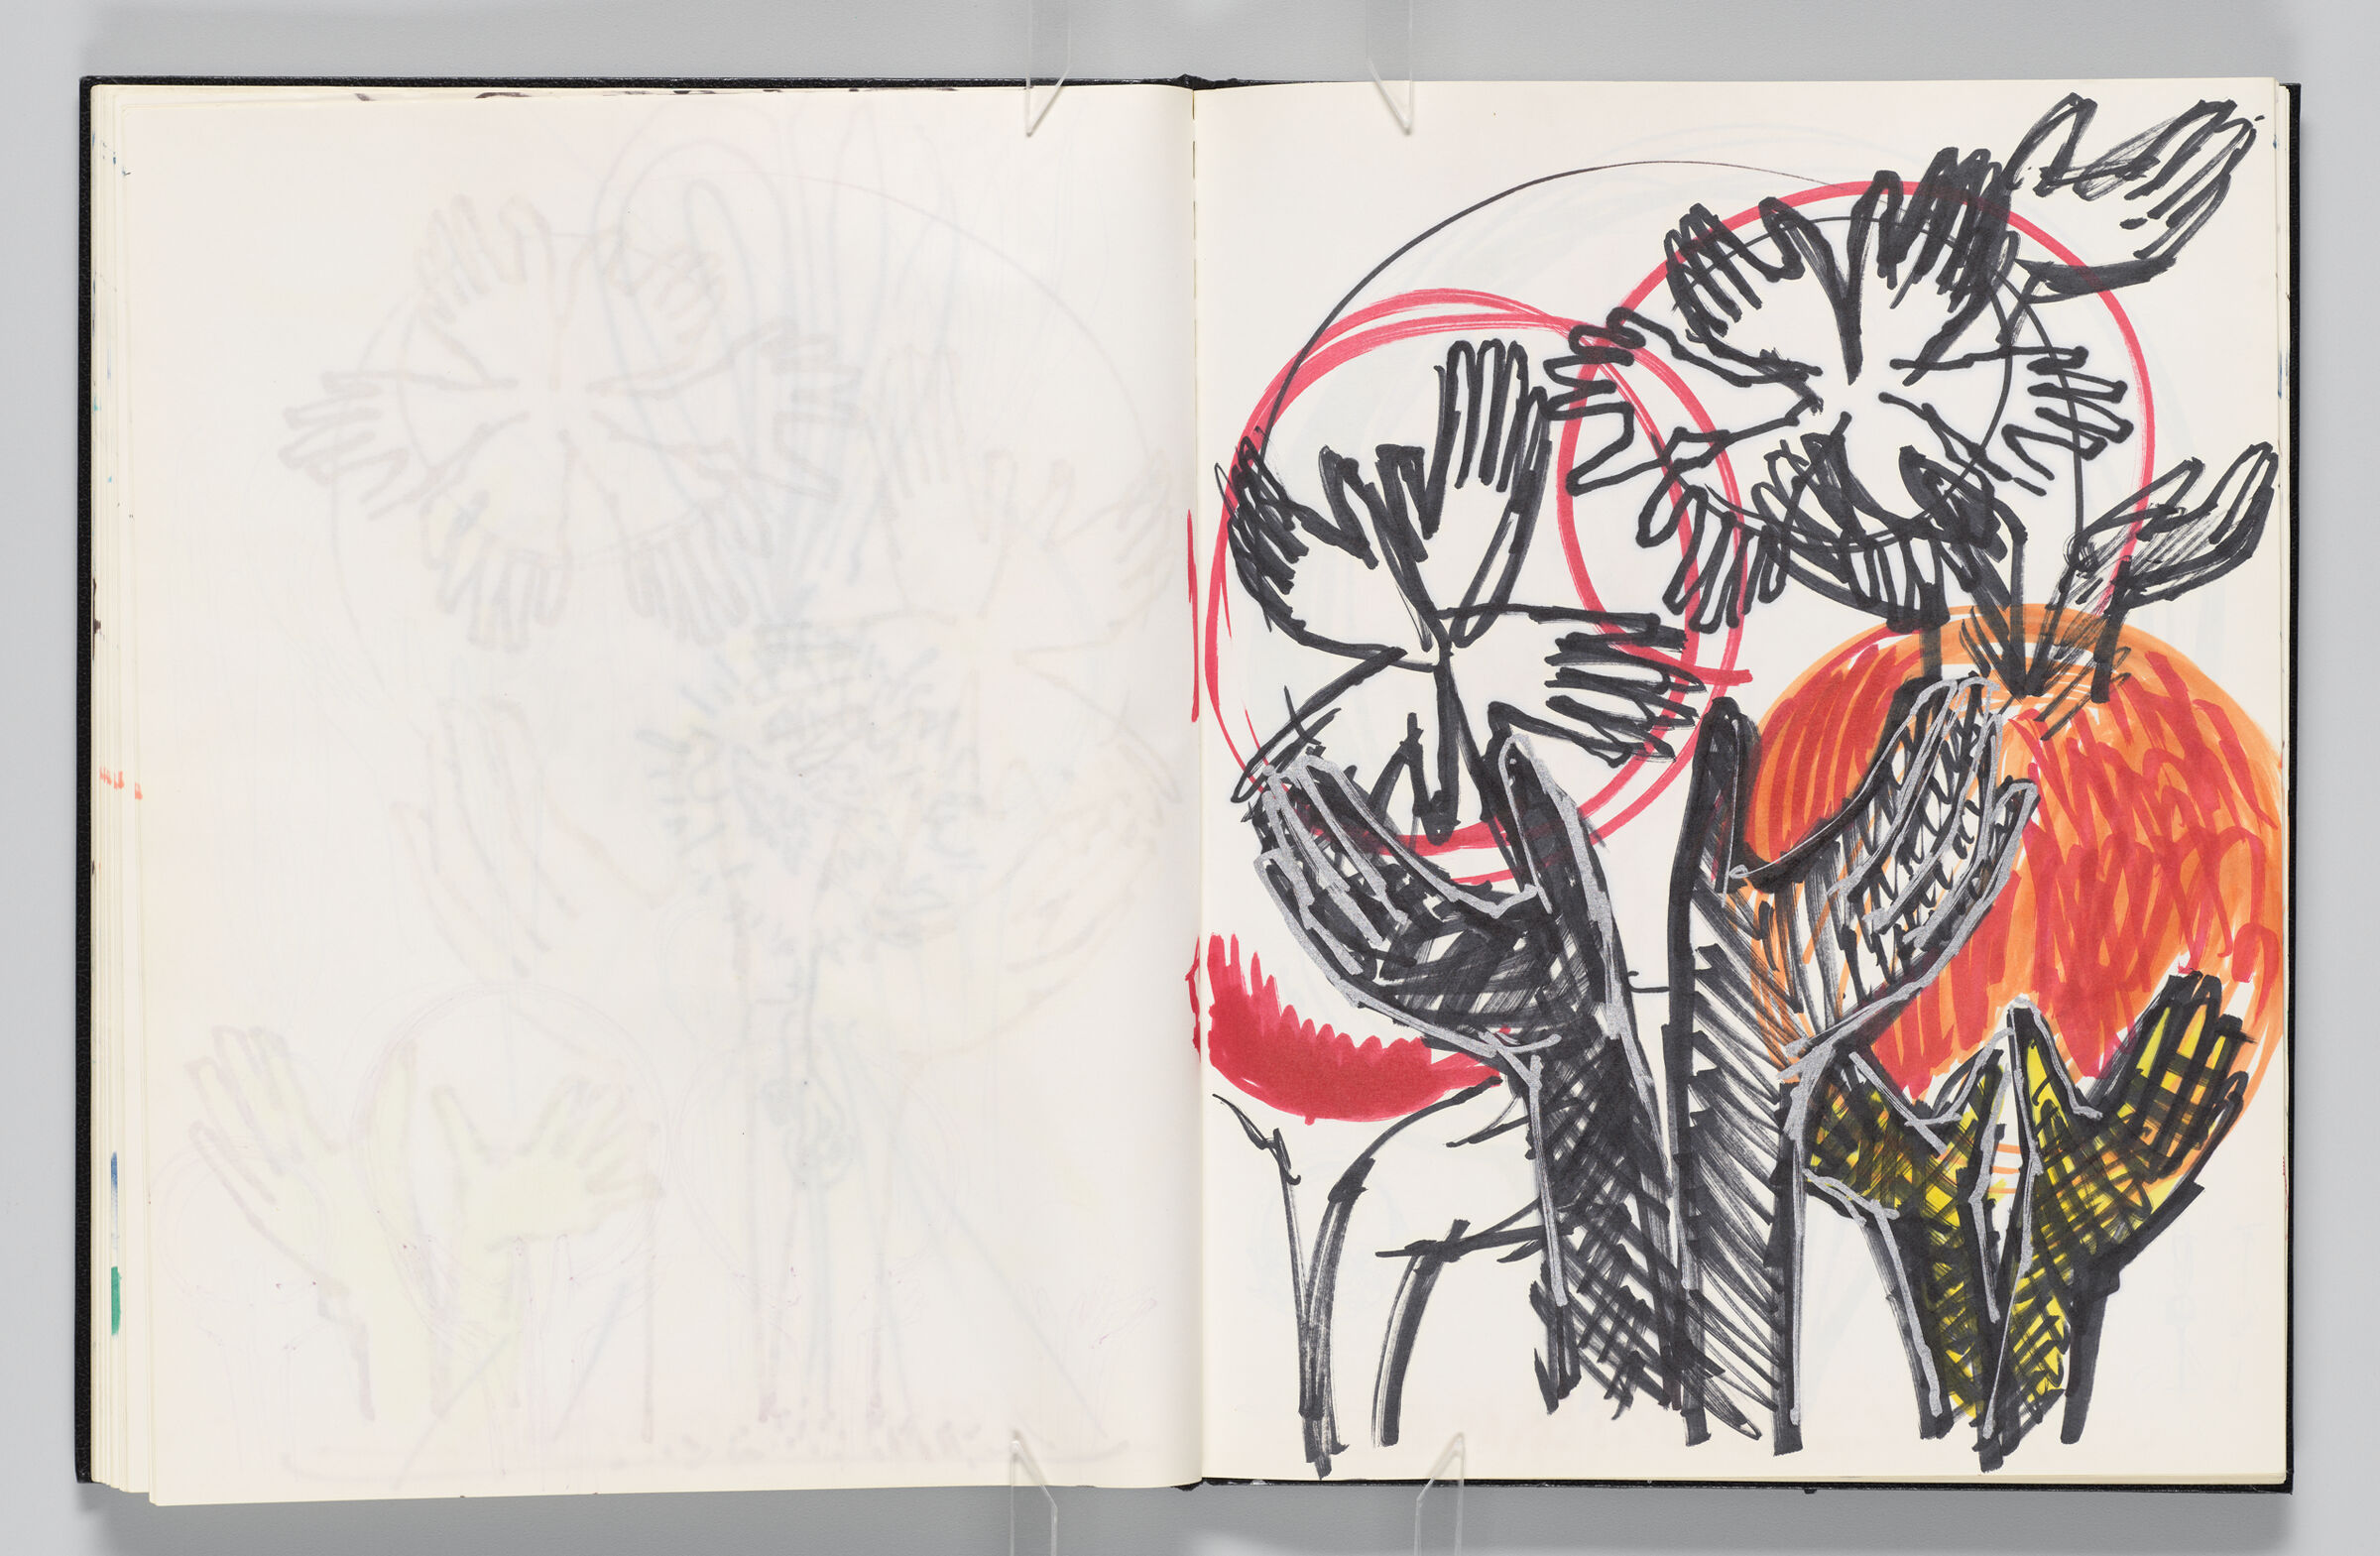 Untitled (Color Transfer, Left Page); Untitled (Hands Holding Globes, Right Page)